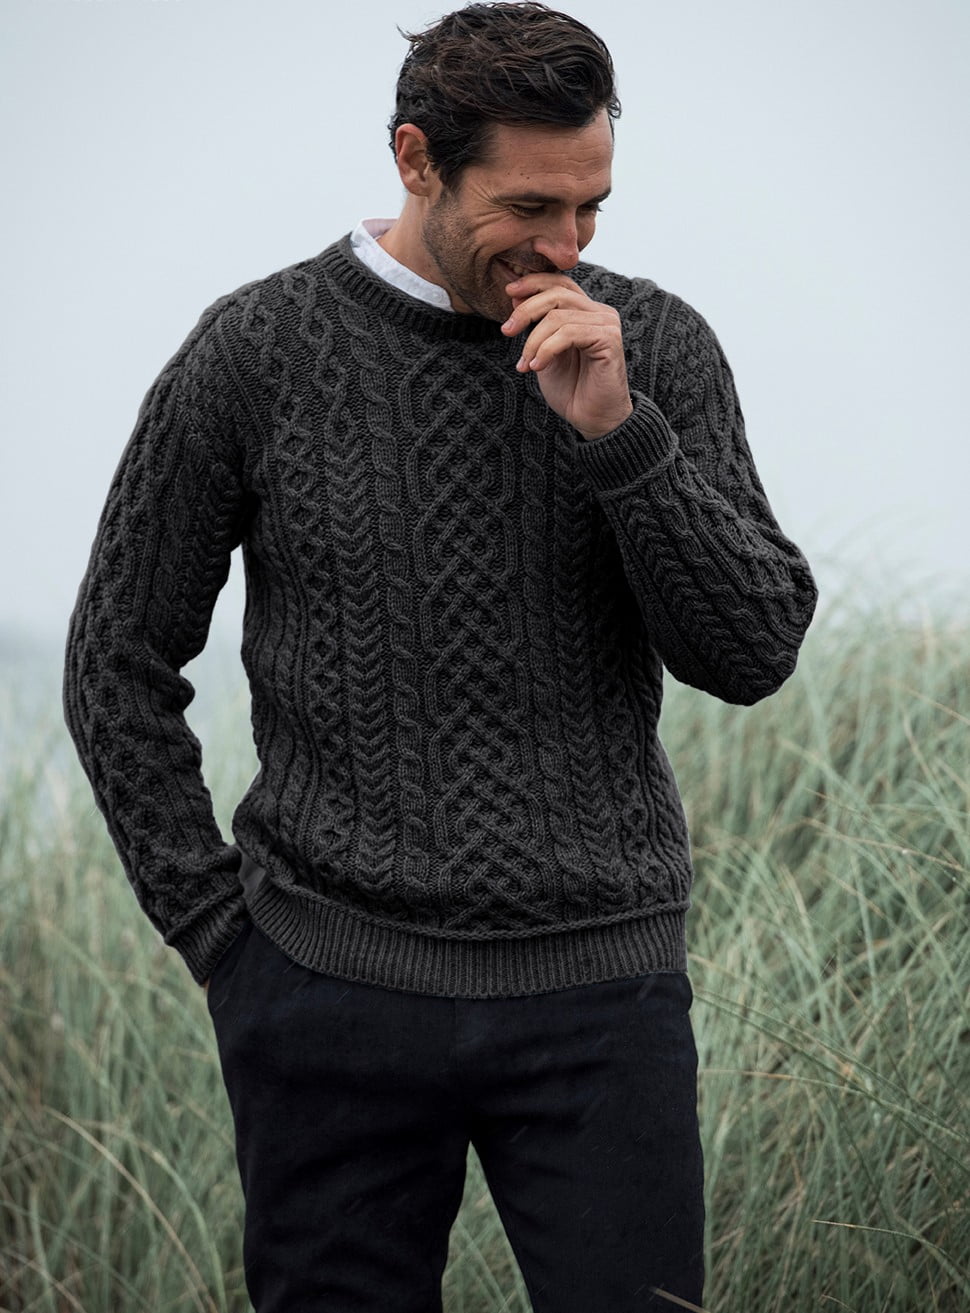 Aran Woollen Mills Men's Cable Knitted 100% Premium SuperSoft Merino Wool  Sweater Fisherman Pullover Honeycomb Stitch Made in Ireland 